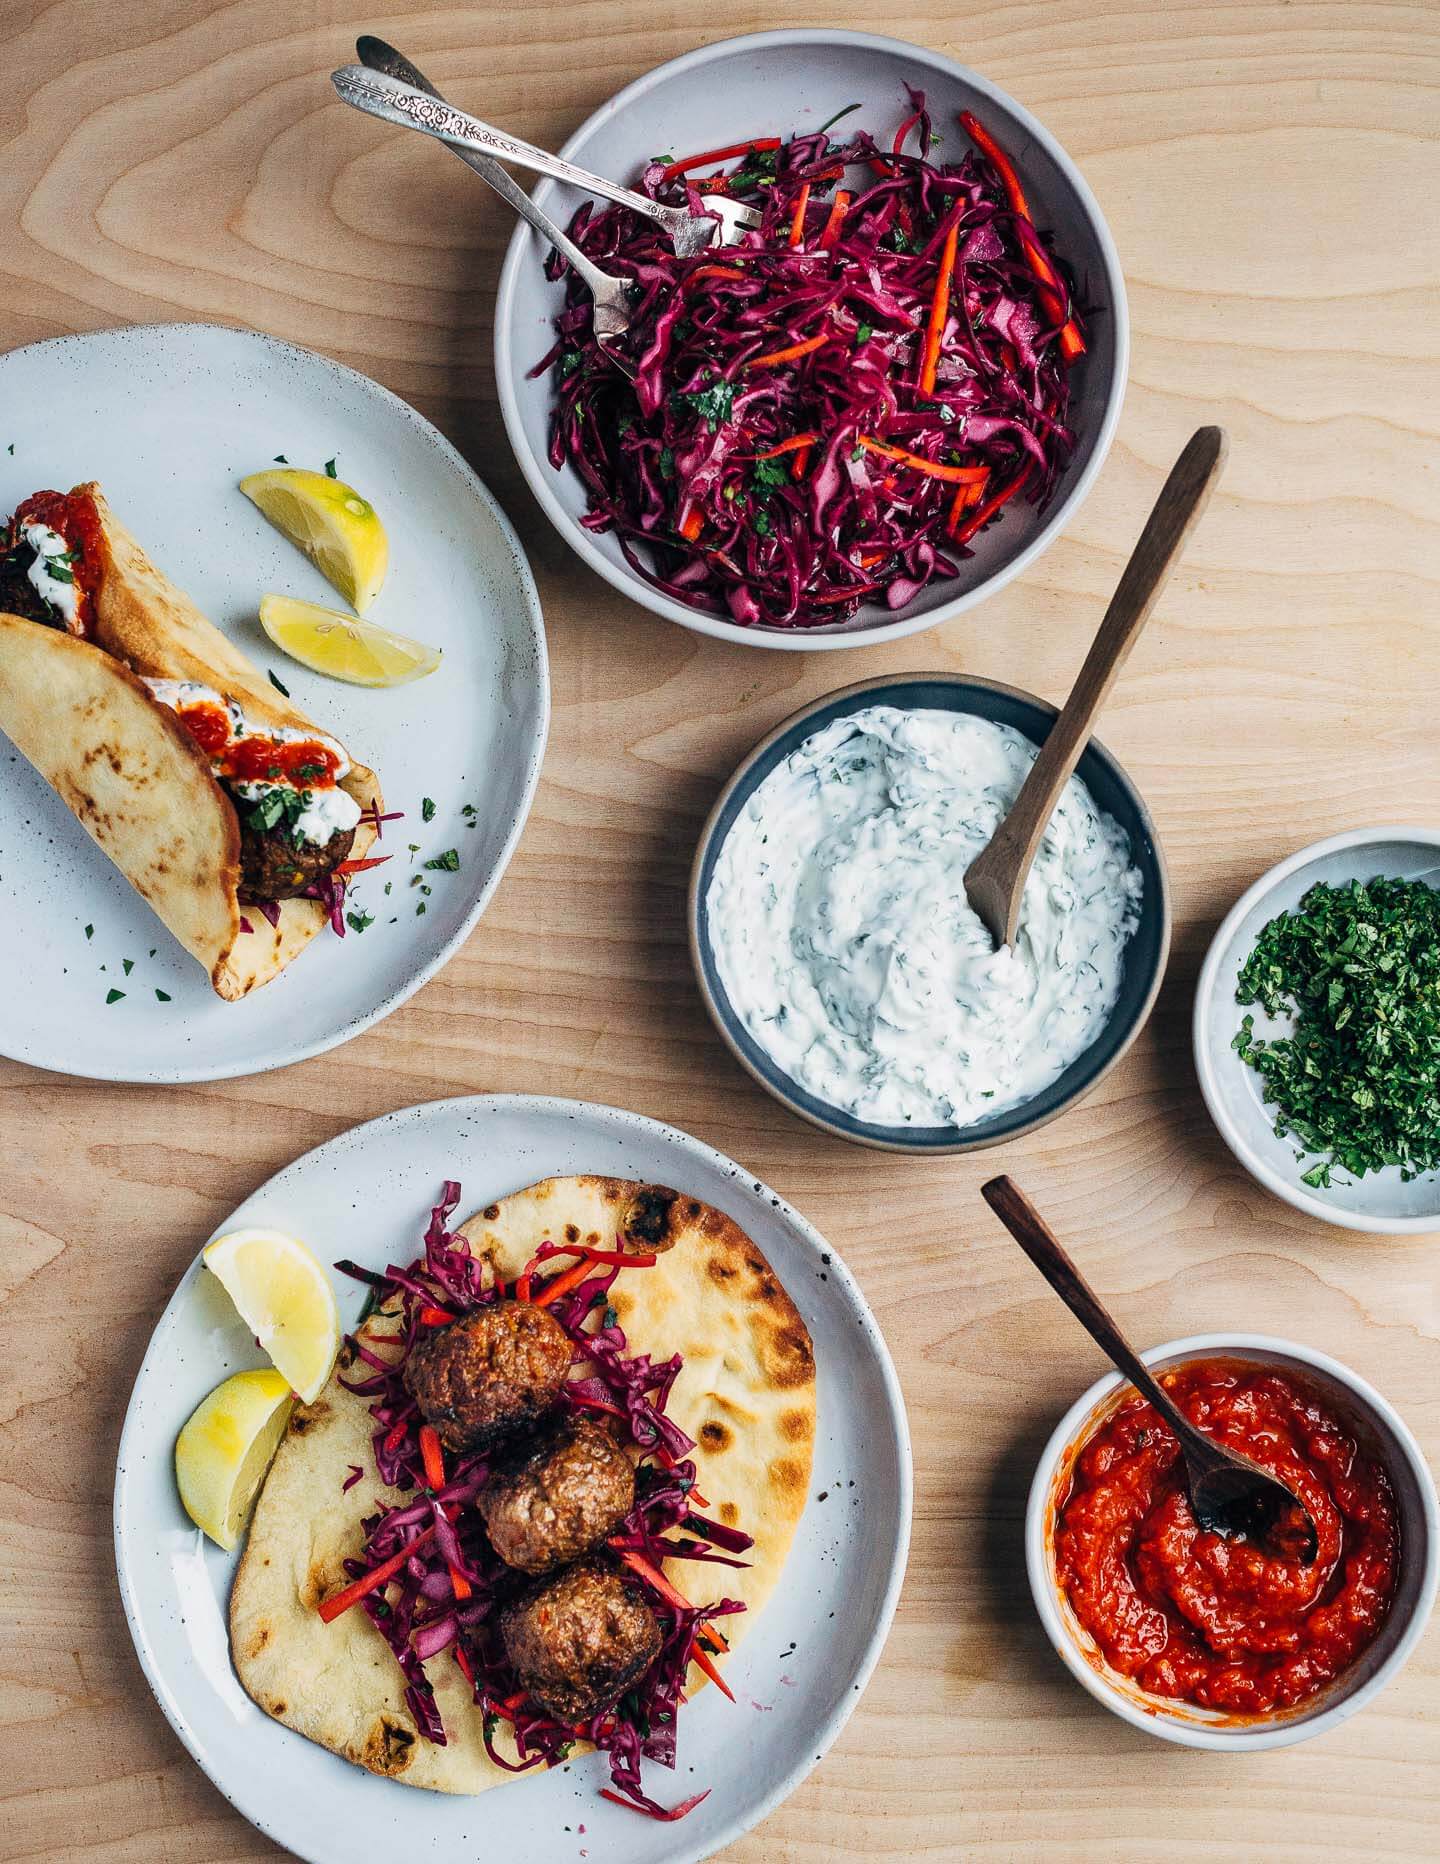 Exceptionally delicious merguez meatball flatbreads layered with red cabbage slaw, herbed yogurt, and harissa. 